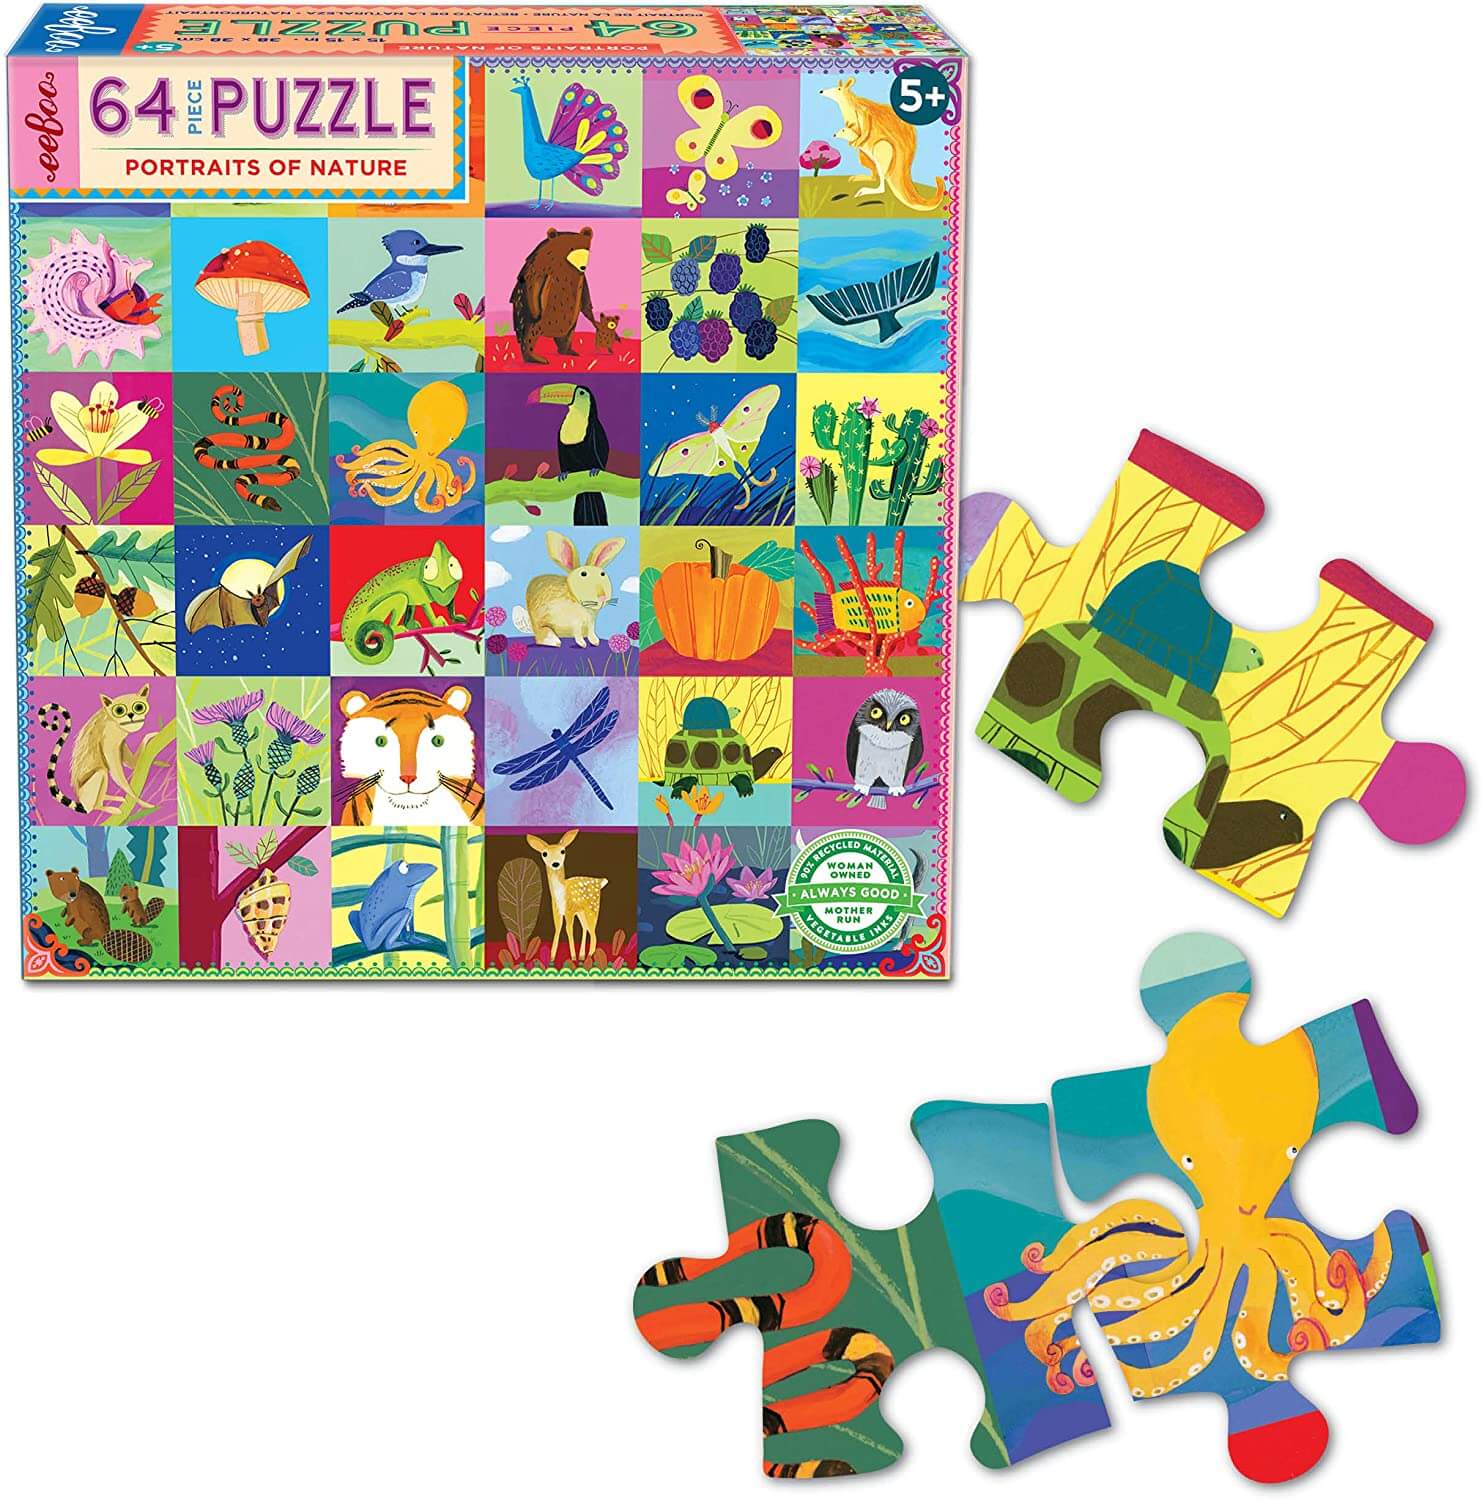 eeBoo - Portraits of Nature 64 Piece Jigsaw Puzzle for Kids photo of puzzle box with puzzle pieces